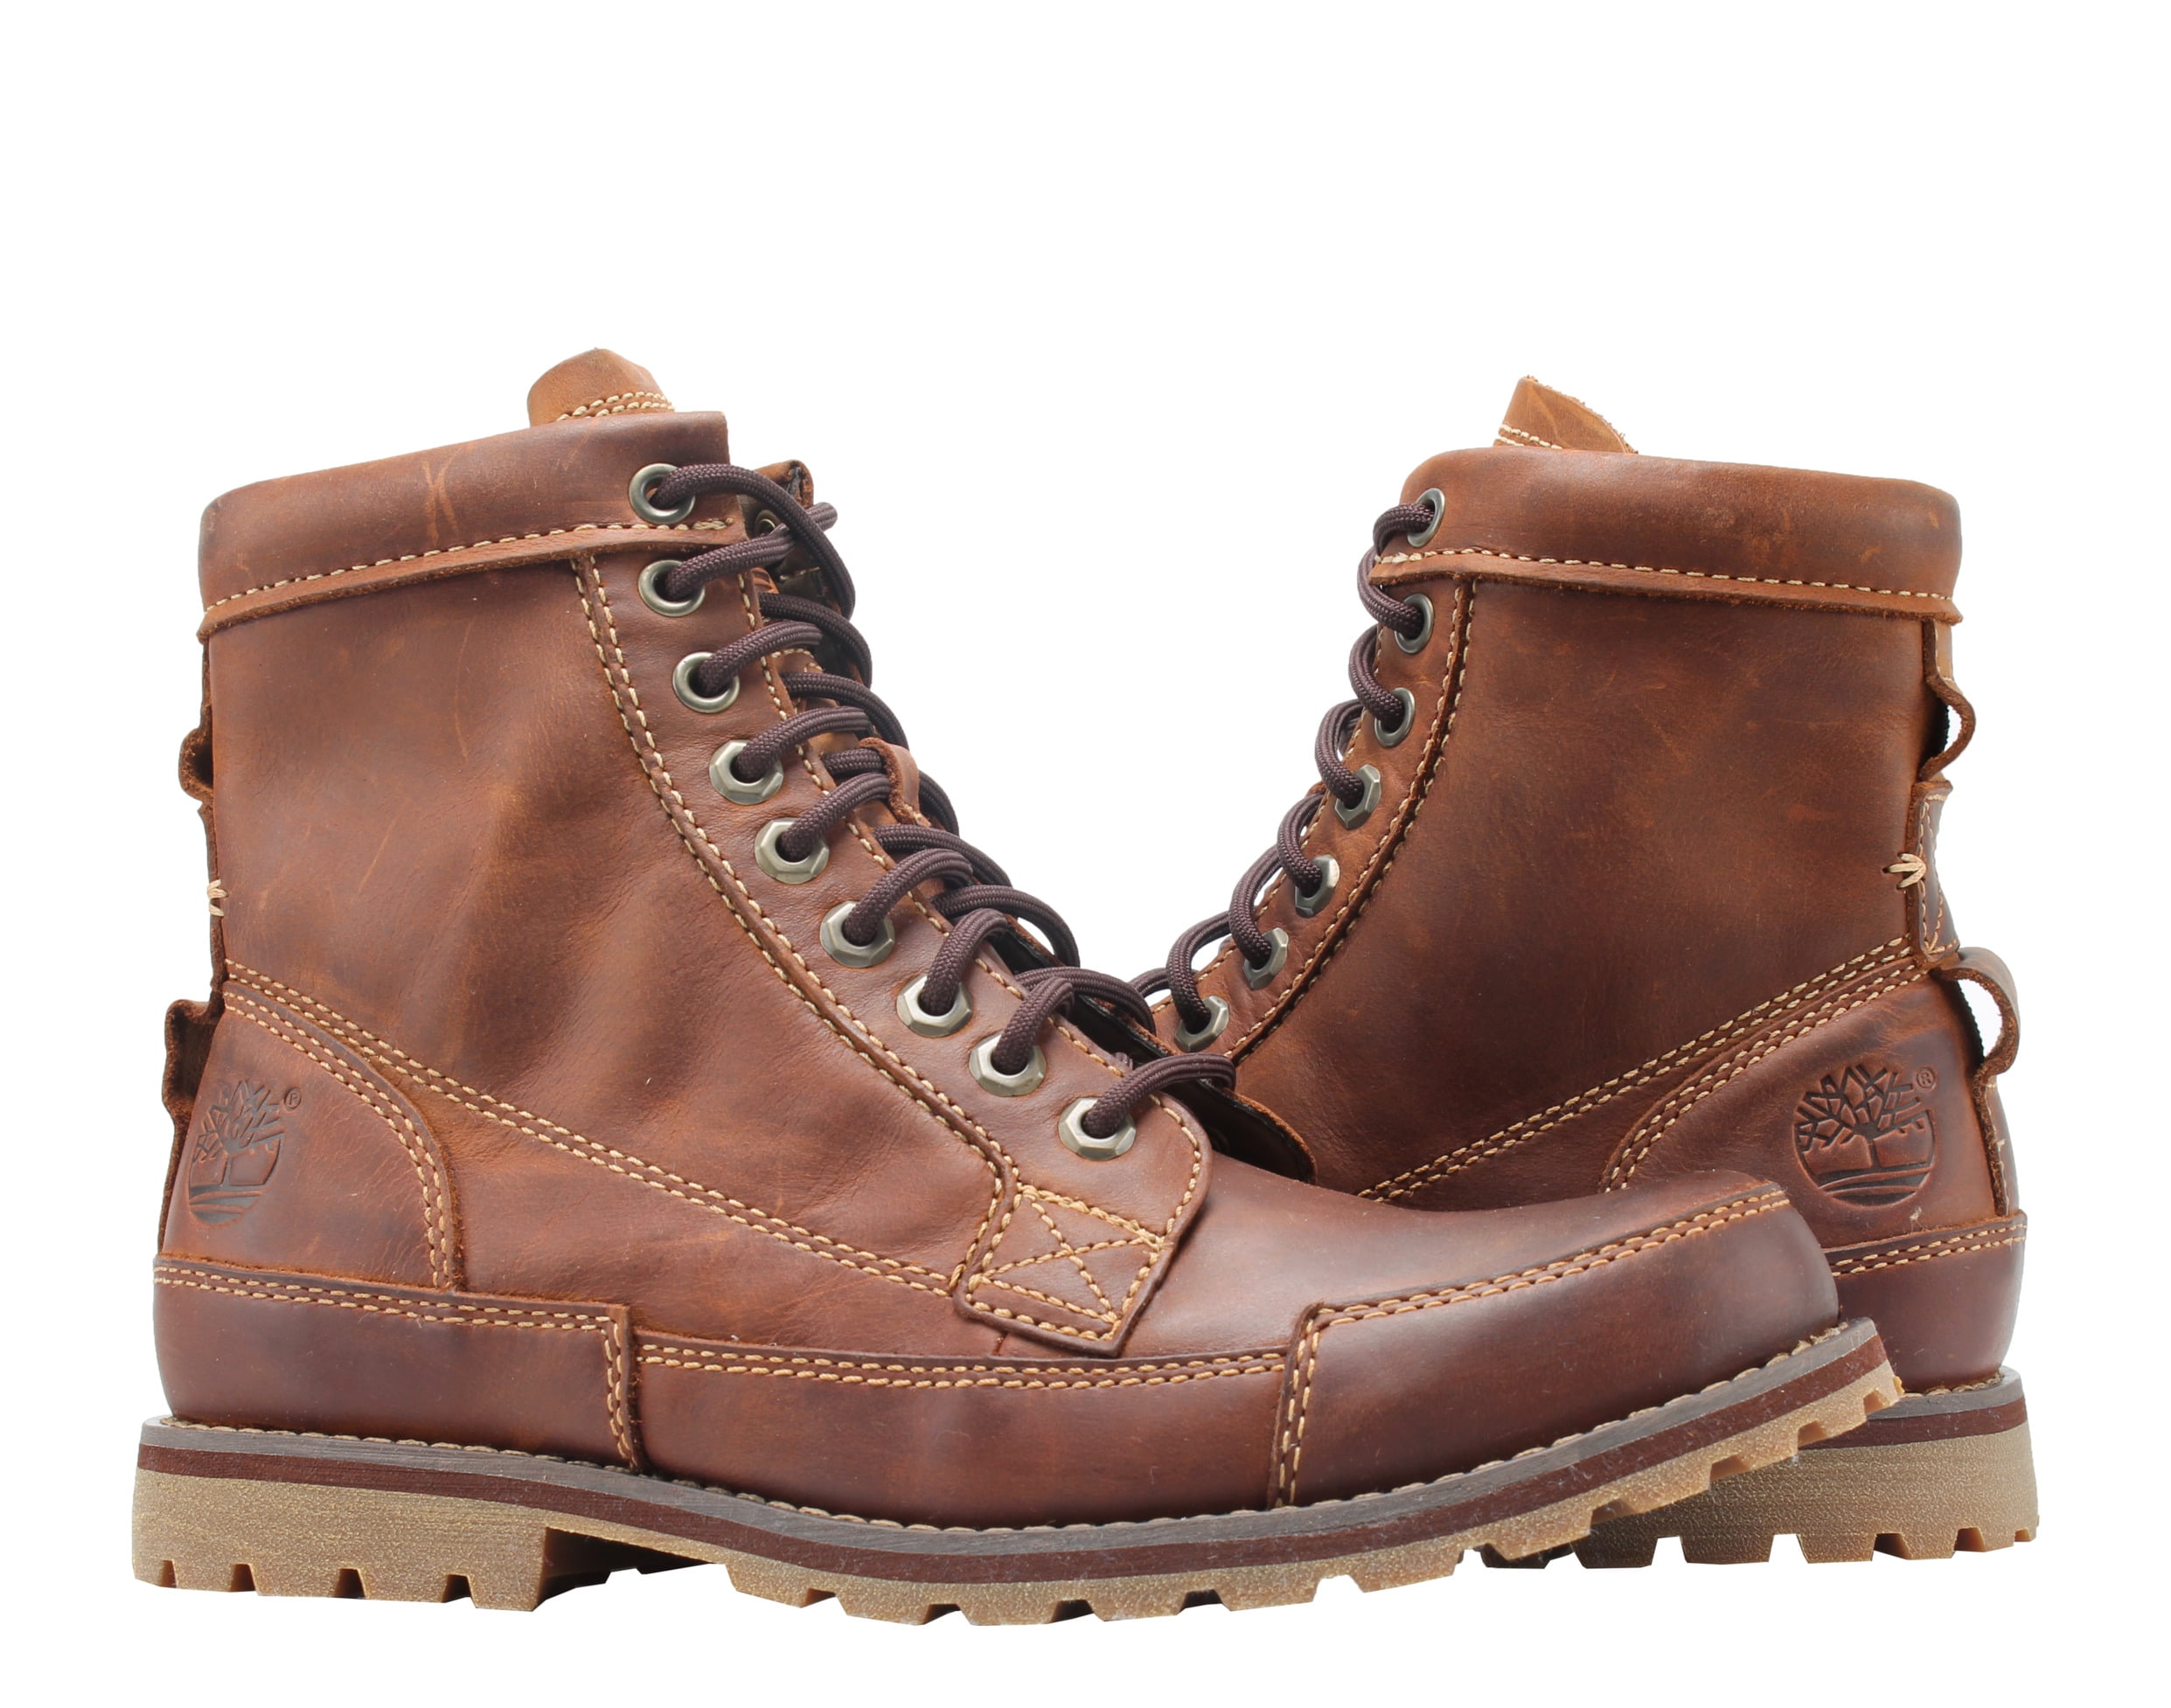 Timberland Earthkeepers 6-Inch Leather Boots Size 9.5M